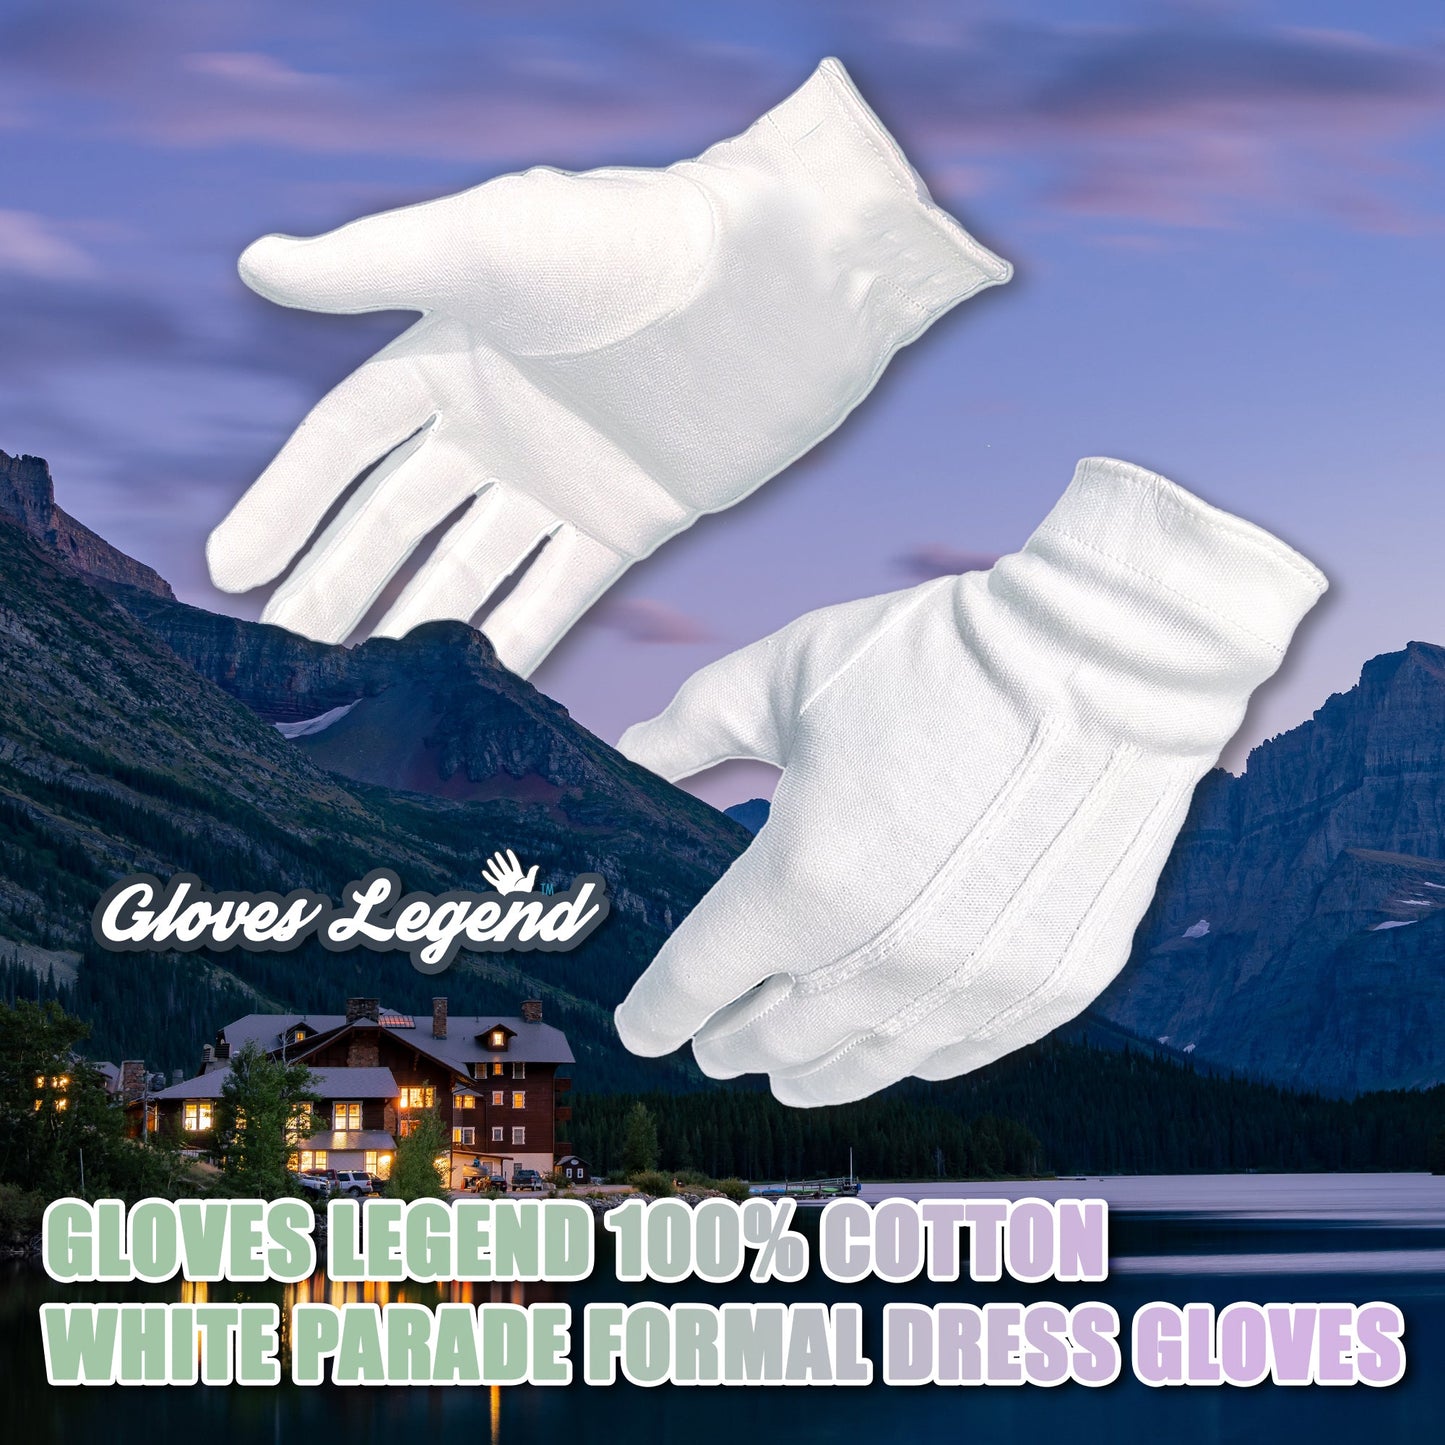 1 Pairs (2 Gloves) Size Medium -Gloves Legend 100% White Cotton Marching Parade Formal Dress Gloves - Buy With Prime